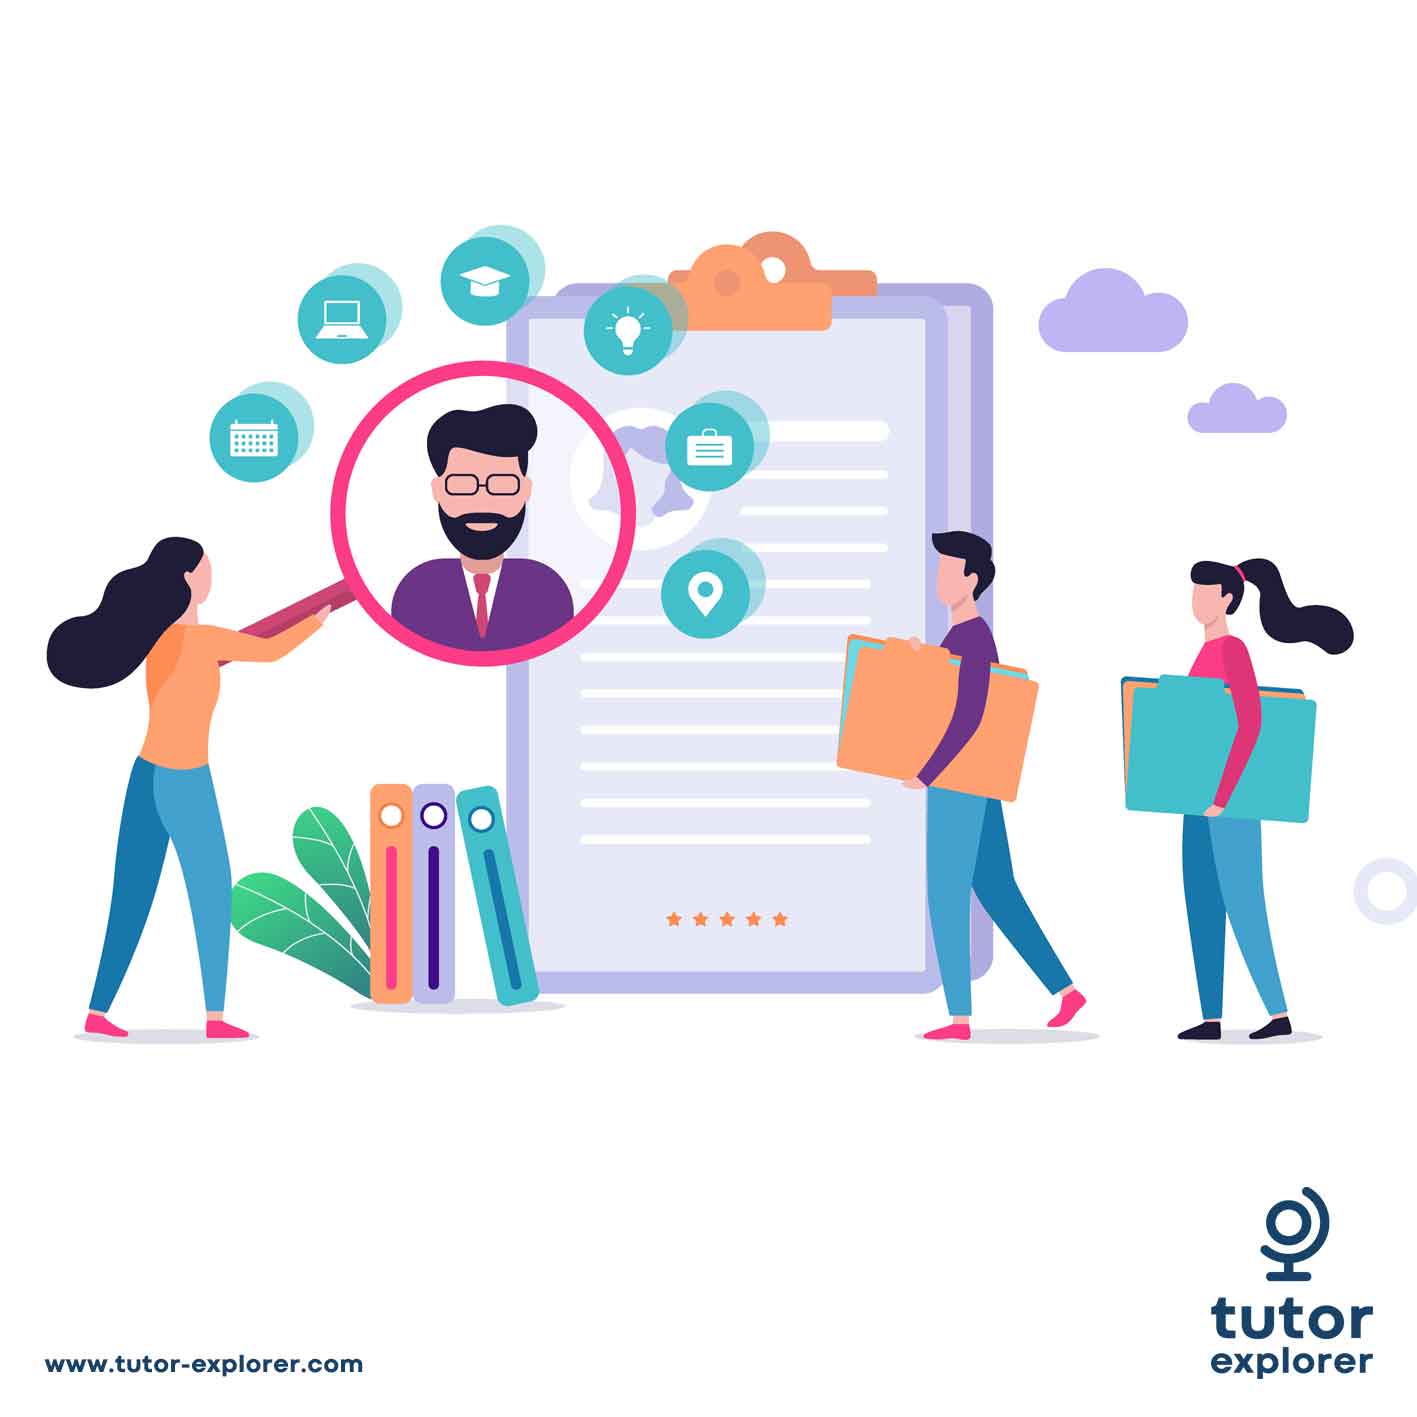 Tutor Explorer - Online And Home Based Tutors For One To One Private Tuition - www.tutor-explorer.com - Tutors For All Ages, Levels And Subjects At Pre-School - Primary School - Secondary School - College - University - Adult Learning Levels